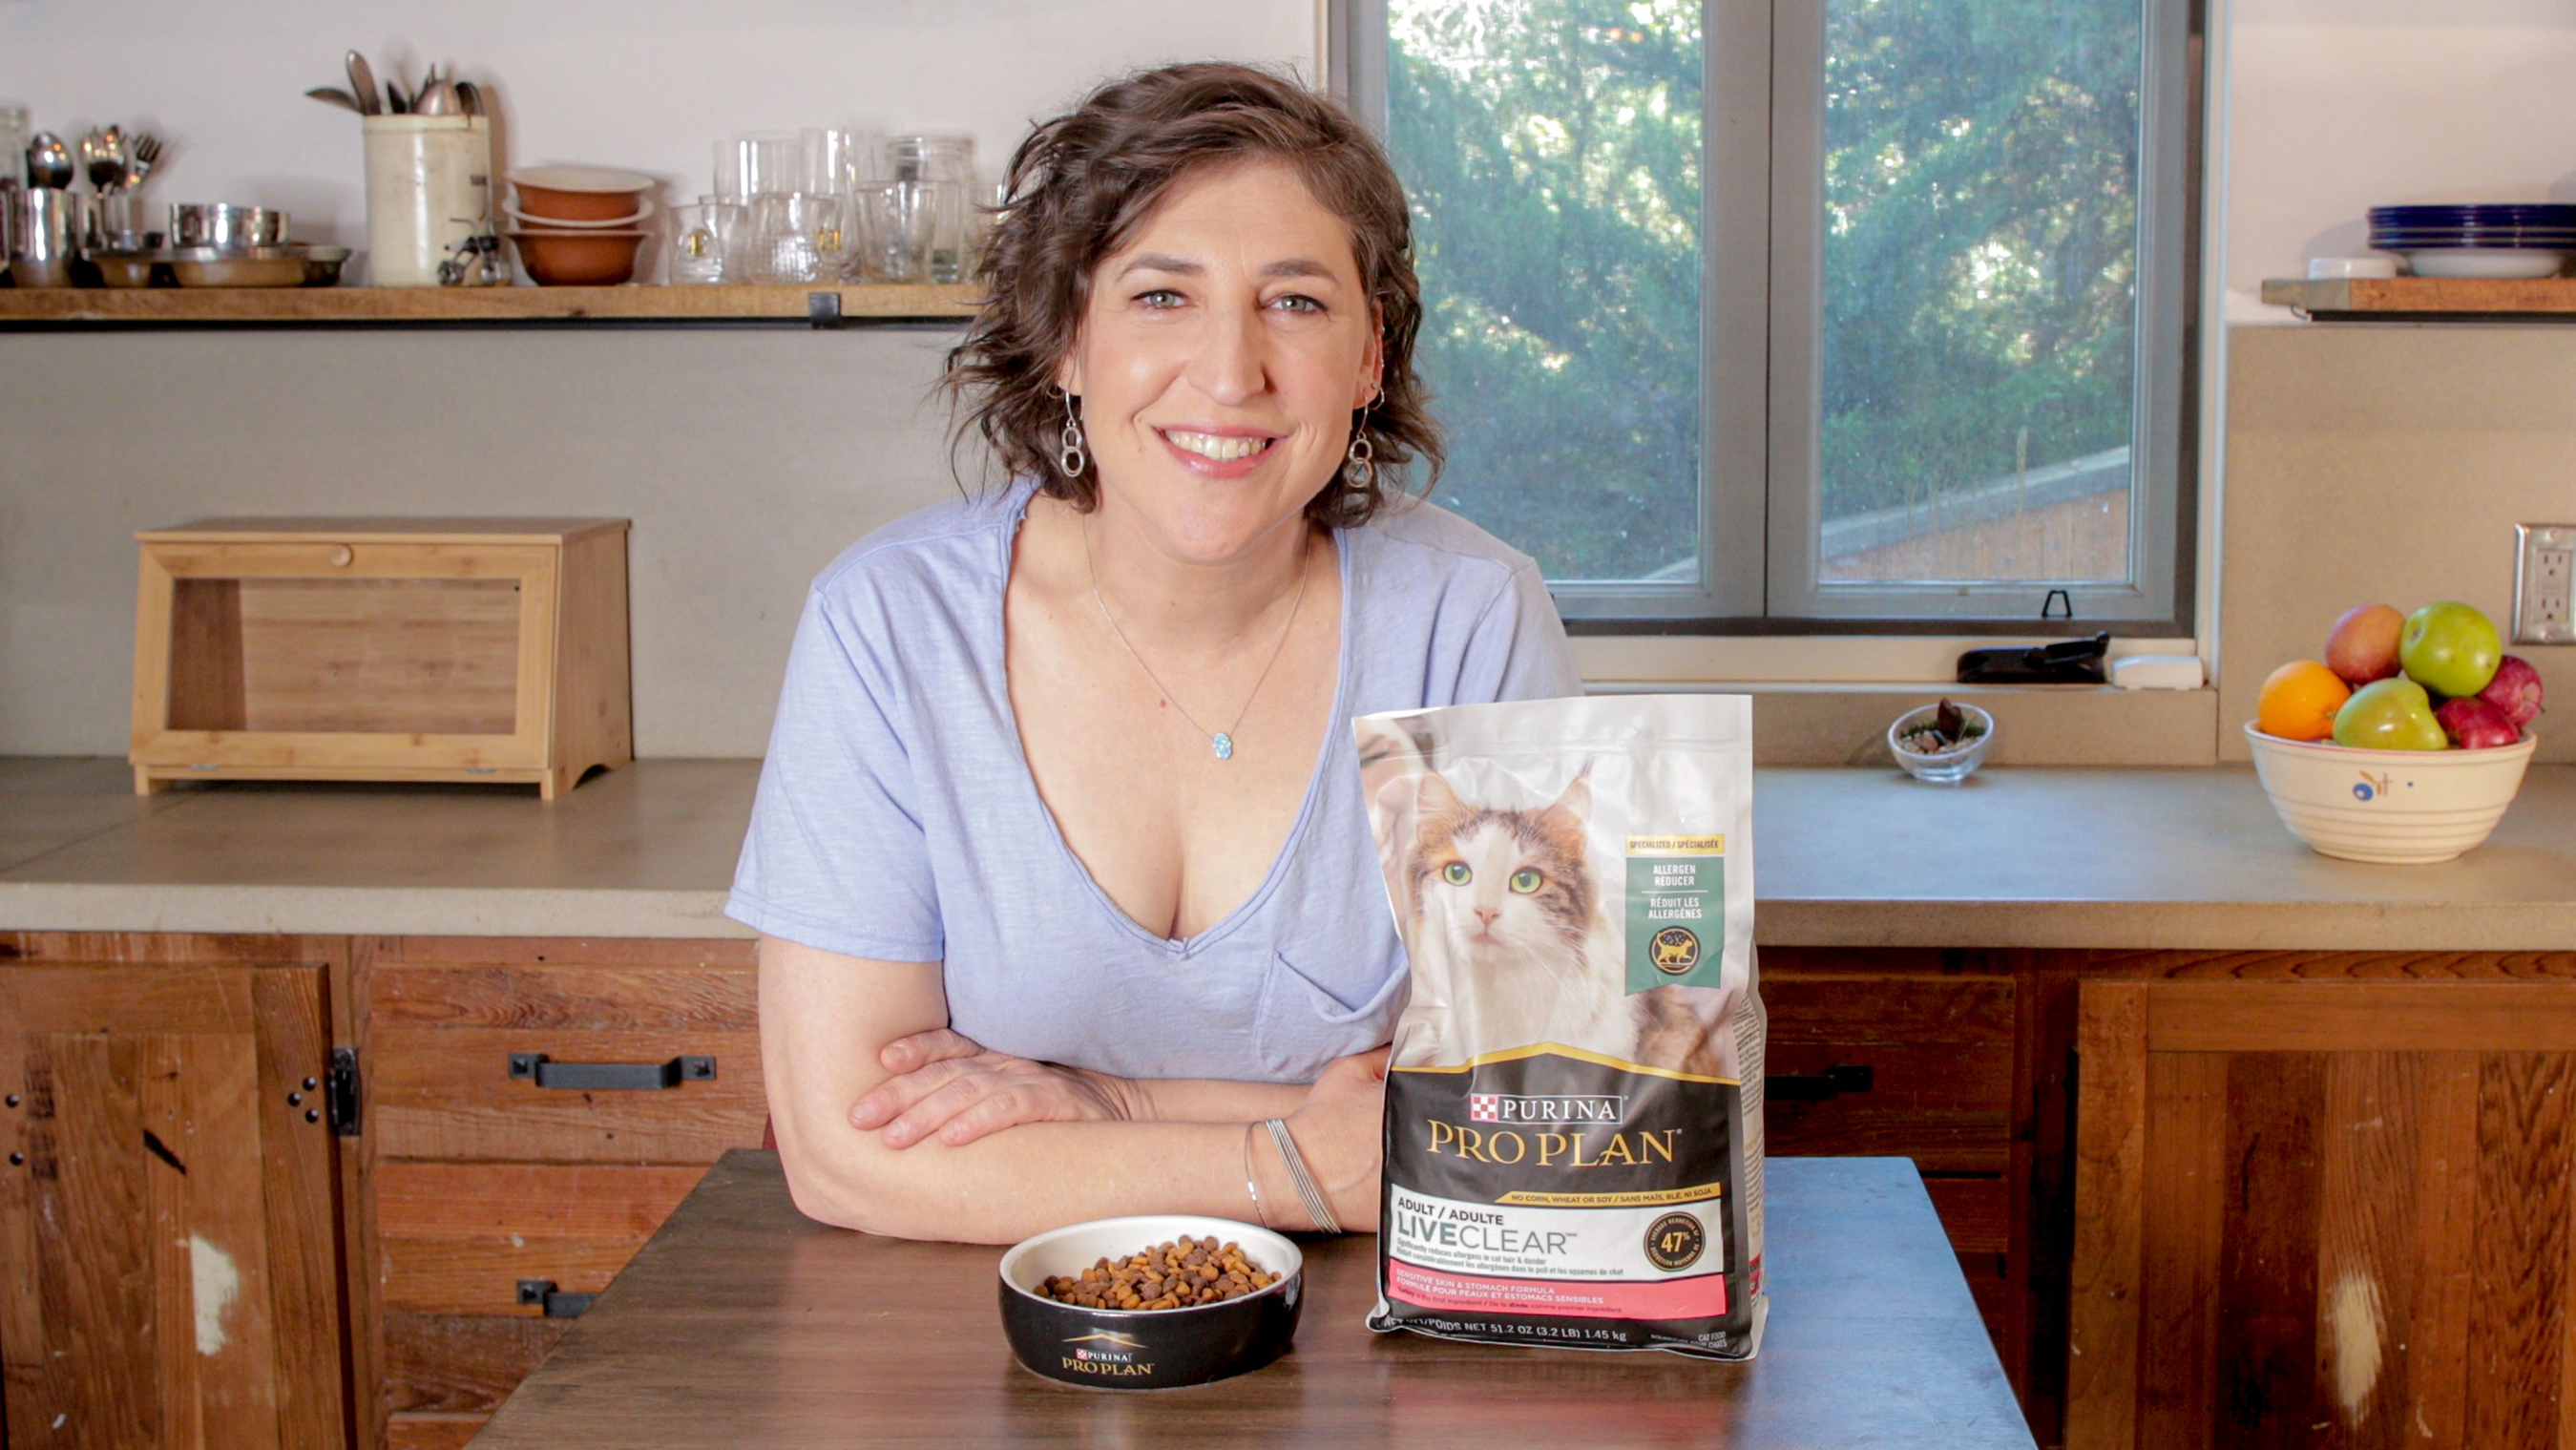 Purina Pro Plan is teaming up with actress and neuroscientist Mayim Bialik to kick-off The LiveClear Challenge, encouraging cat owners with cat allergen sensitivities to discover the life-changing power of Pro Plan LiveClear, the first and only cat food that reduces the major allergen in cat hair and dander.